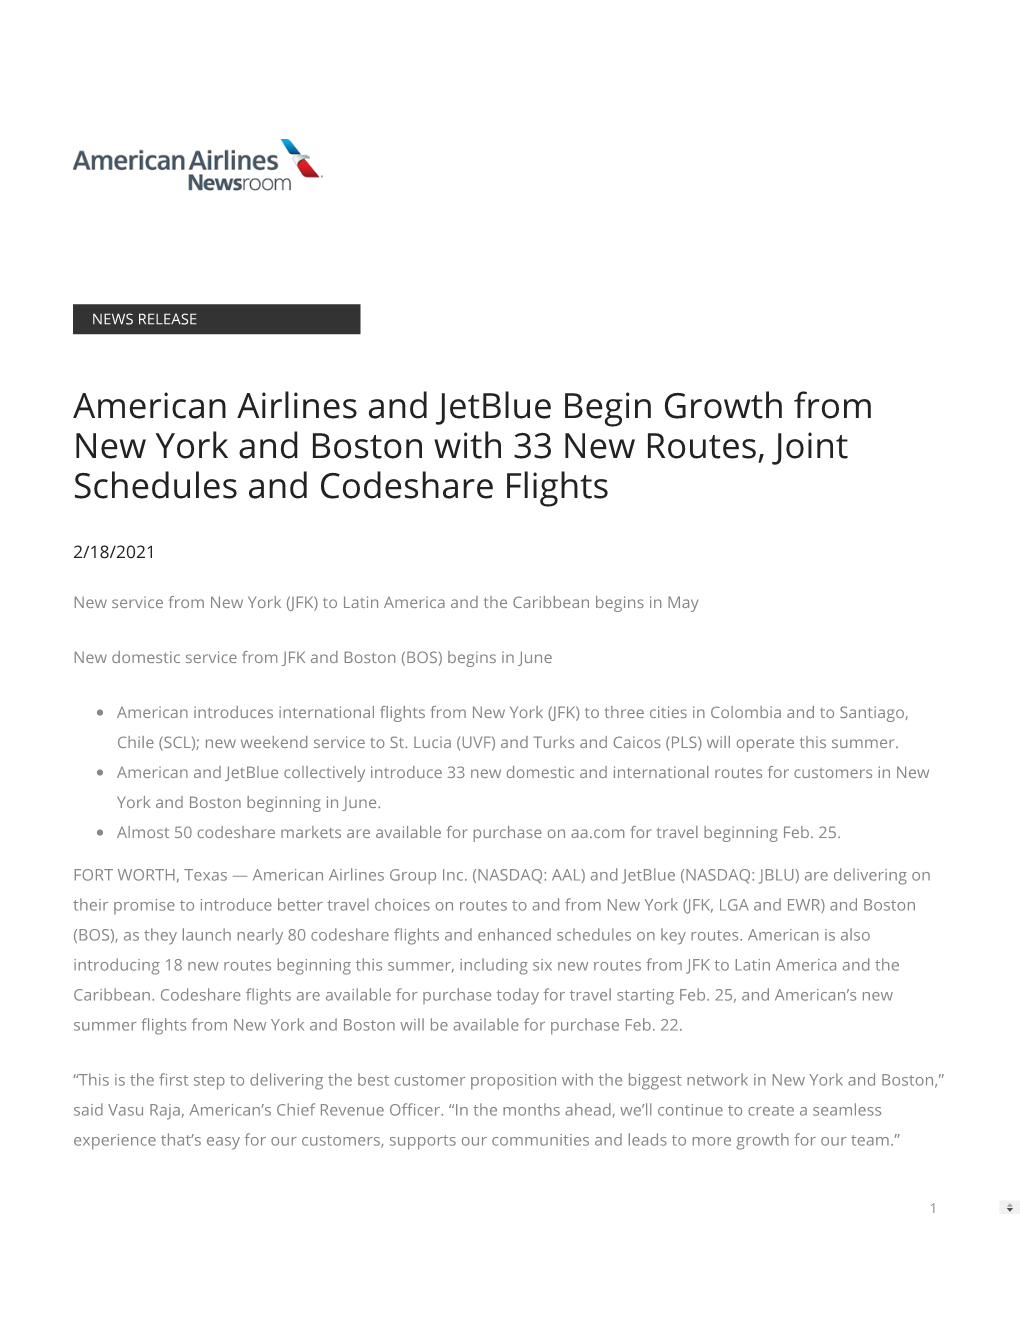 American Airlines and Jetblue Begin Growth from New York and Boston with 33 New Routes, Joint Schedules and Codeshare Flights